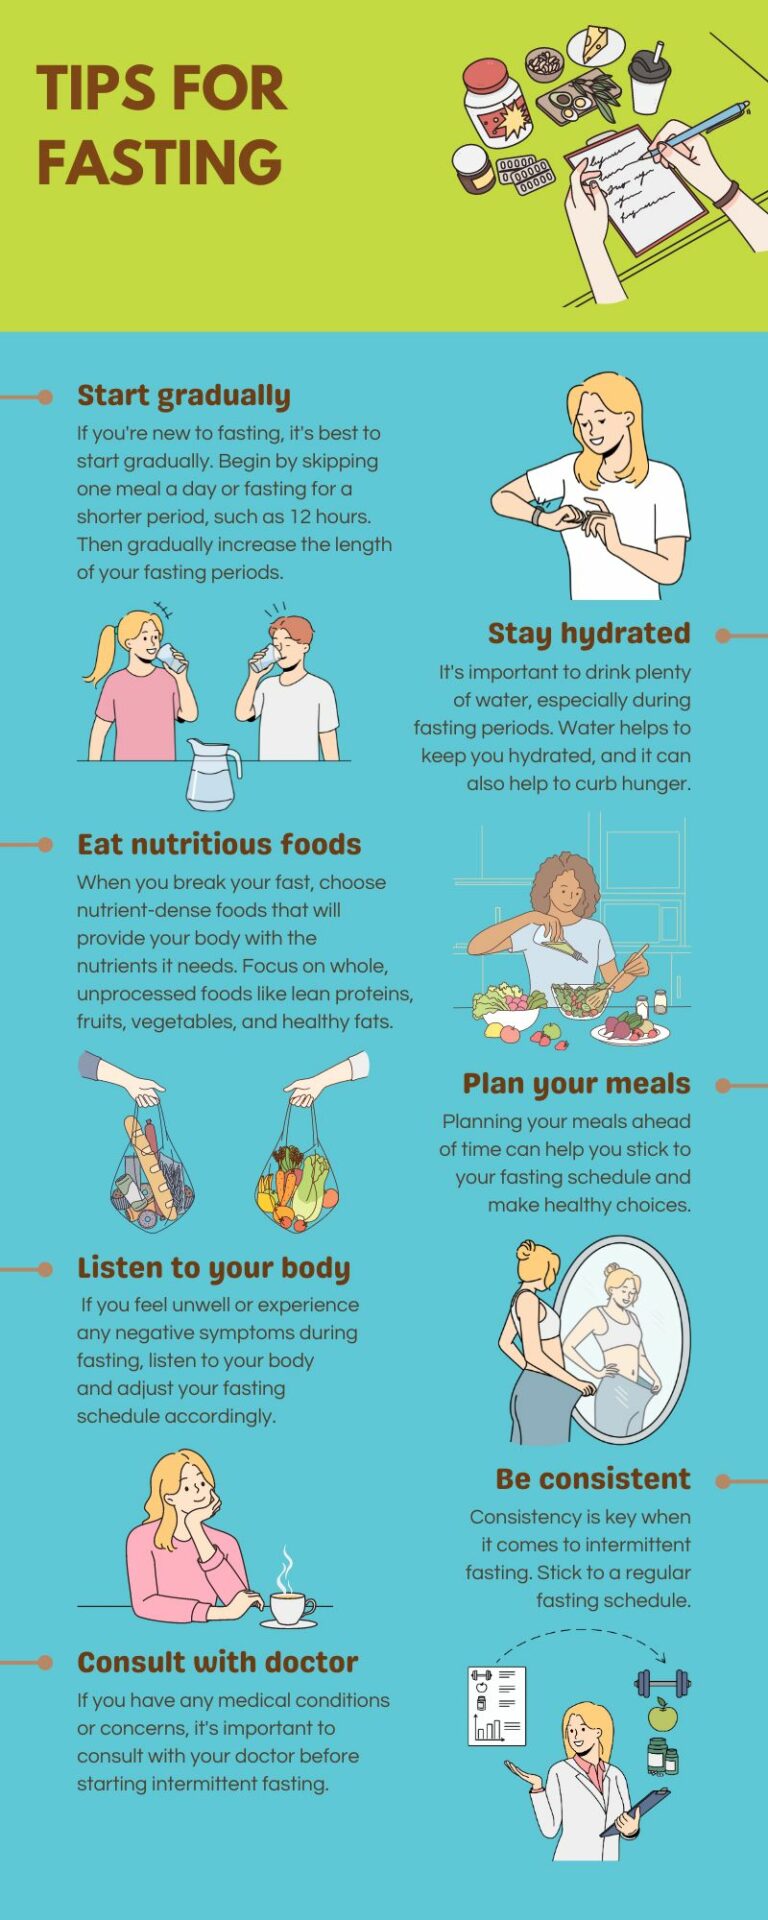 Our top tips for fasting